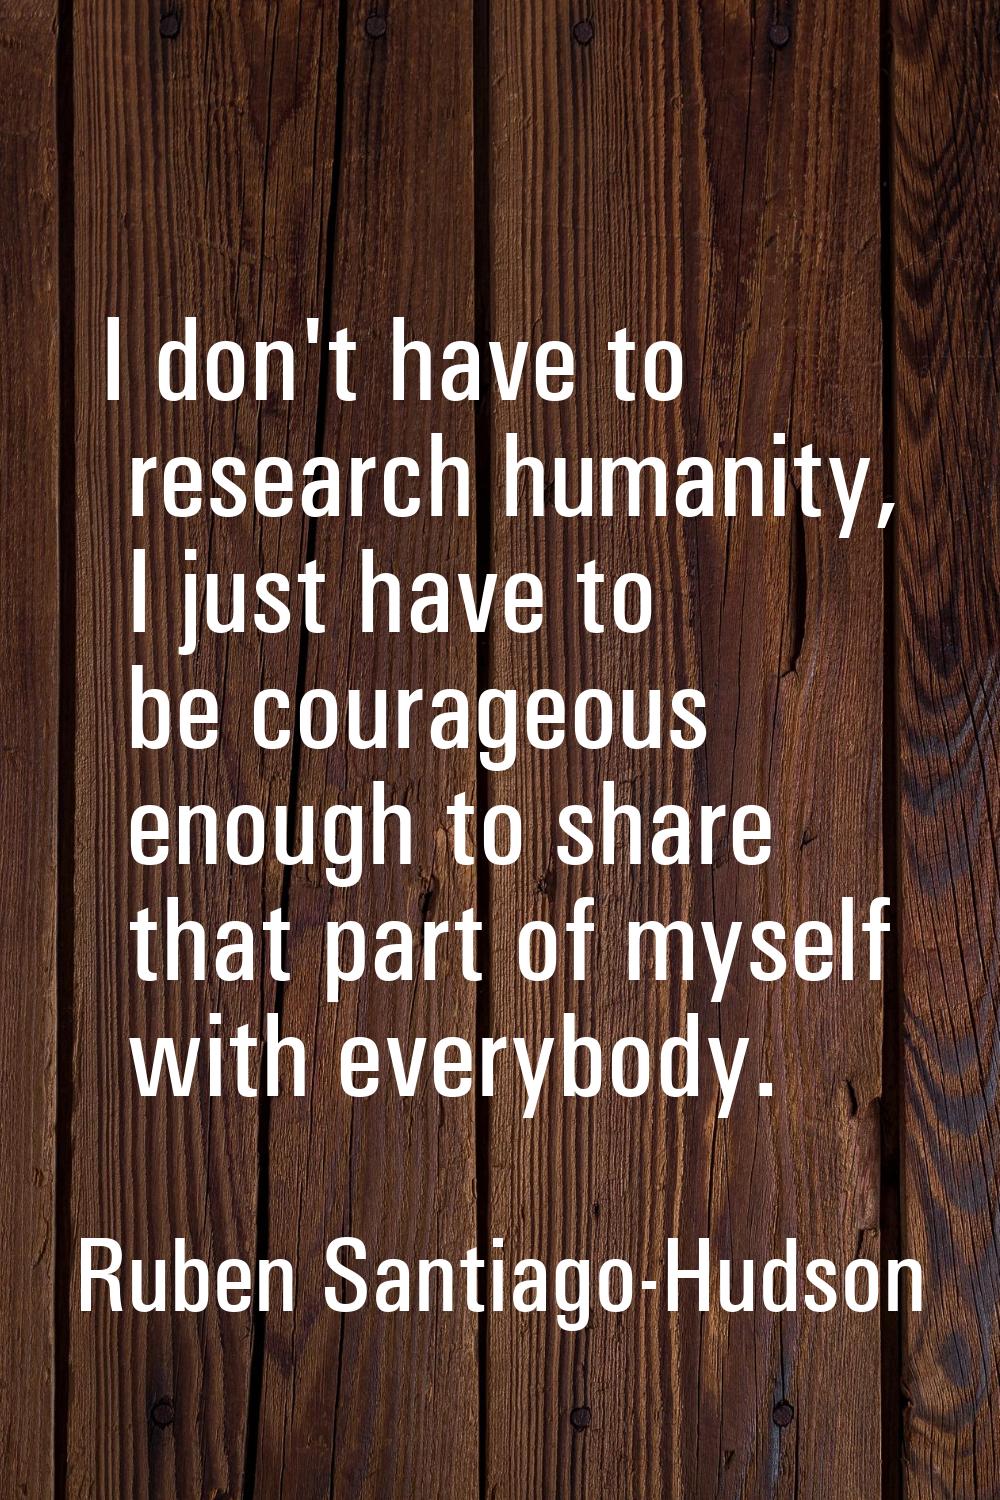 I don't have to research humanity, I just have to be courageous enough to share that part of myself